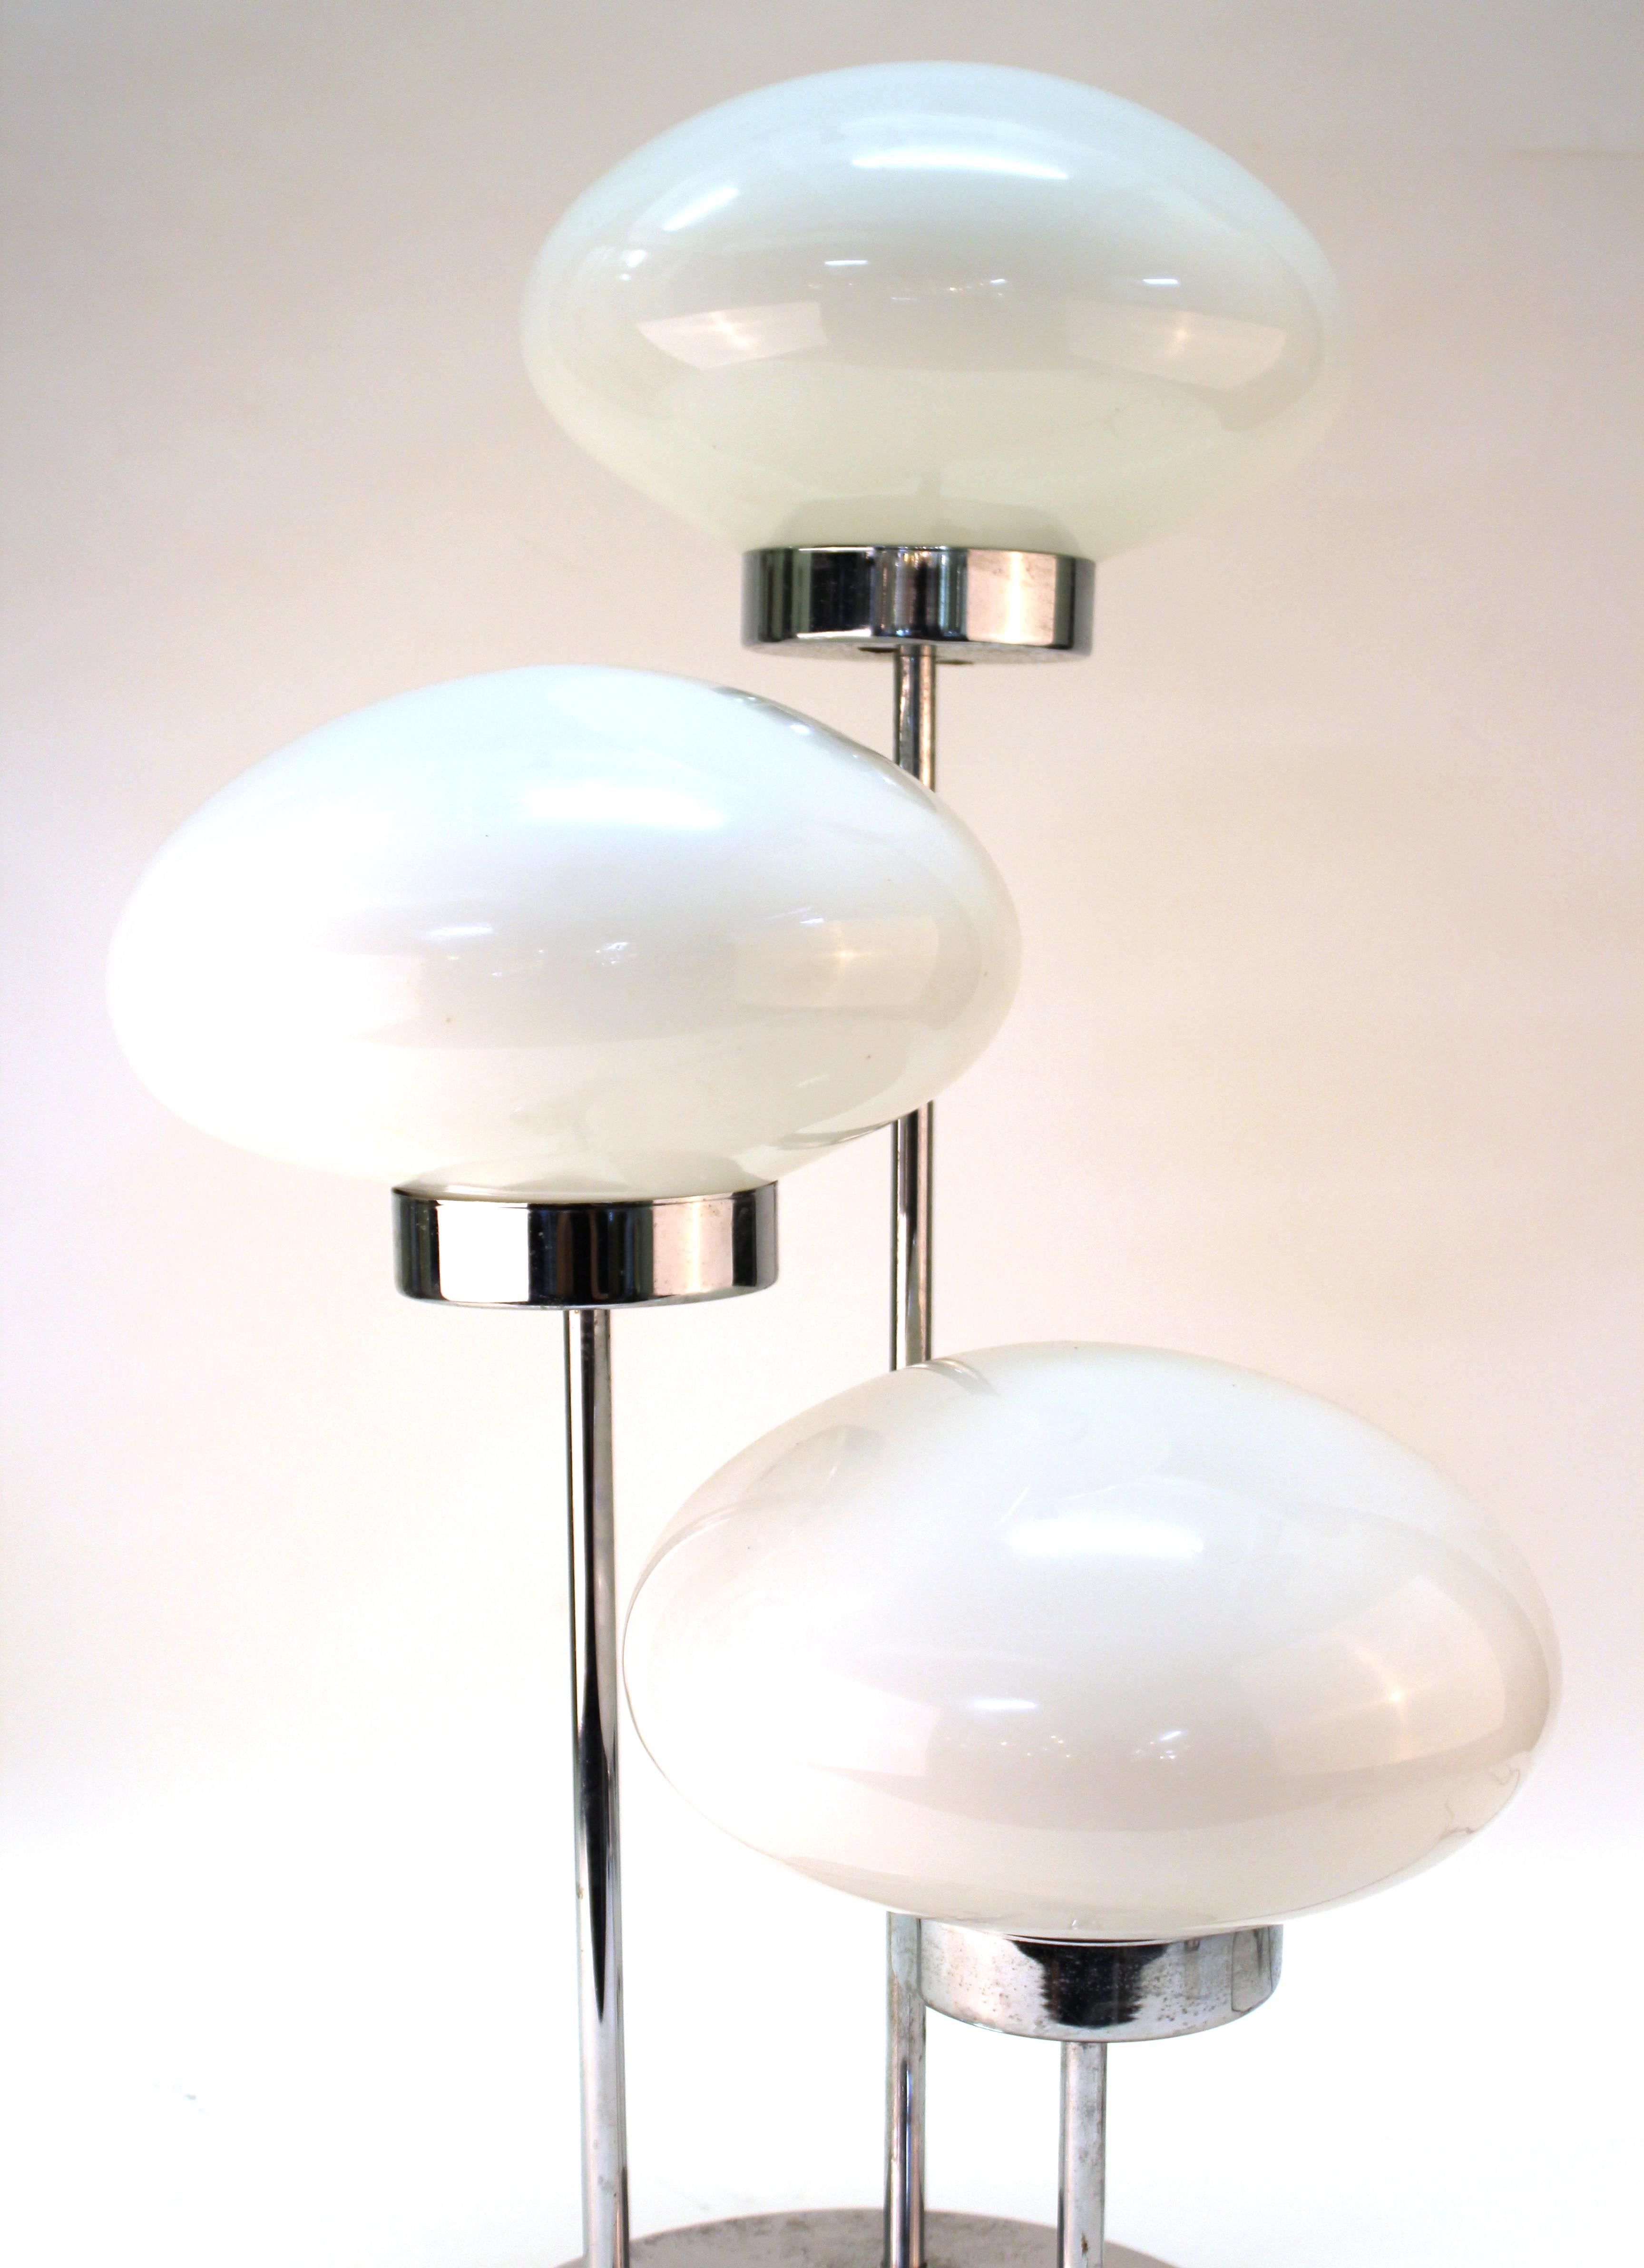 Mid-Century Modern period table lamp in chrome featuring three domed light sources in white glass. The piece has some age-appropriate wear and patina to the chrome as well as some small old paint drops on the white glass lights.